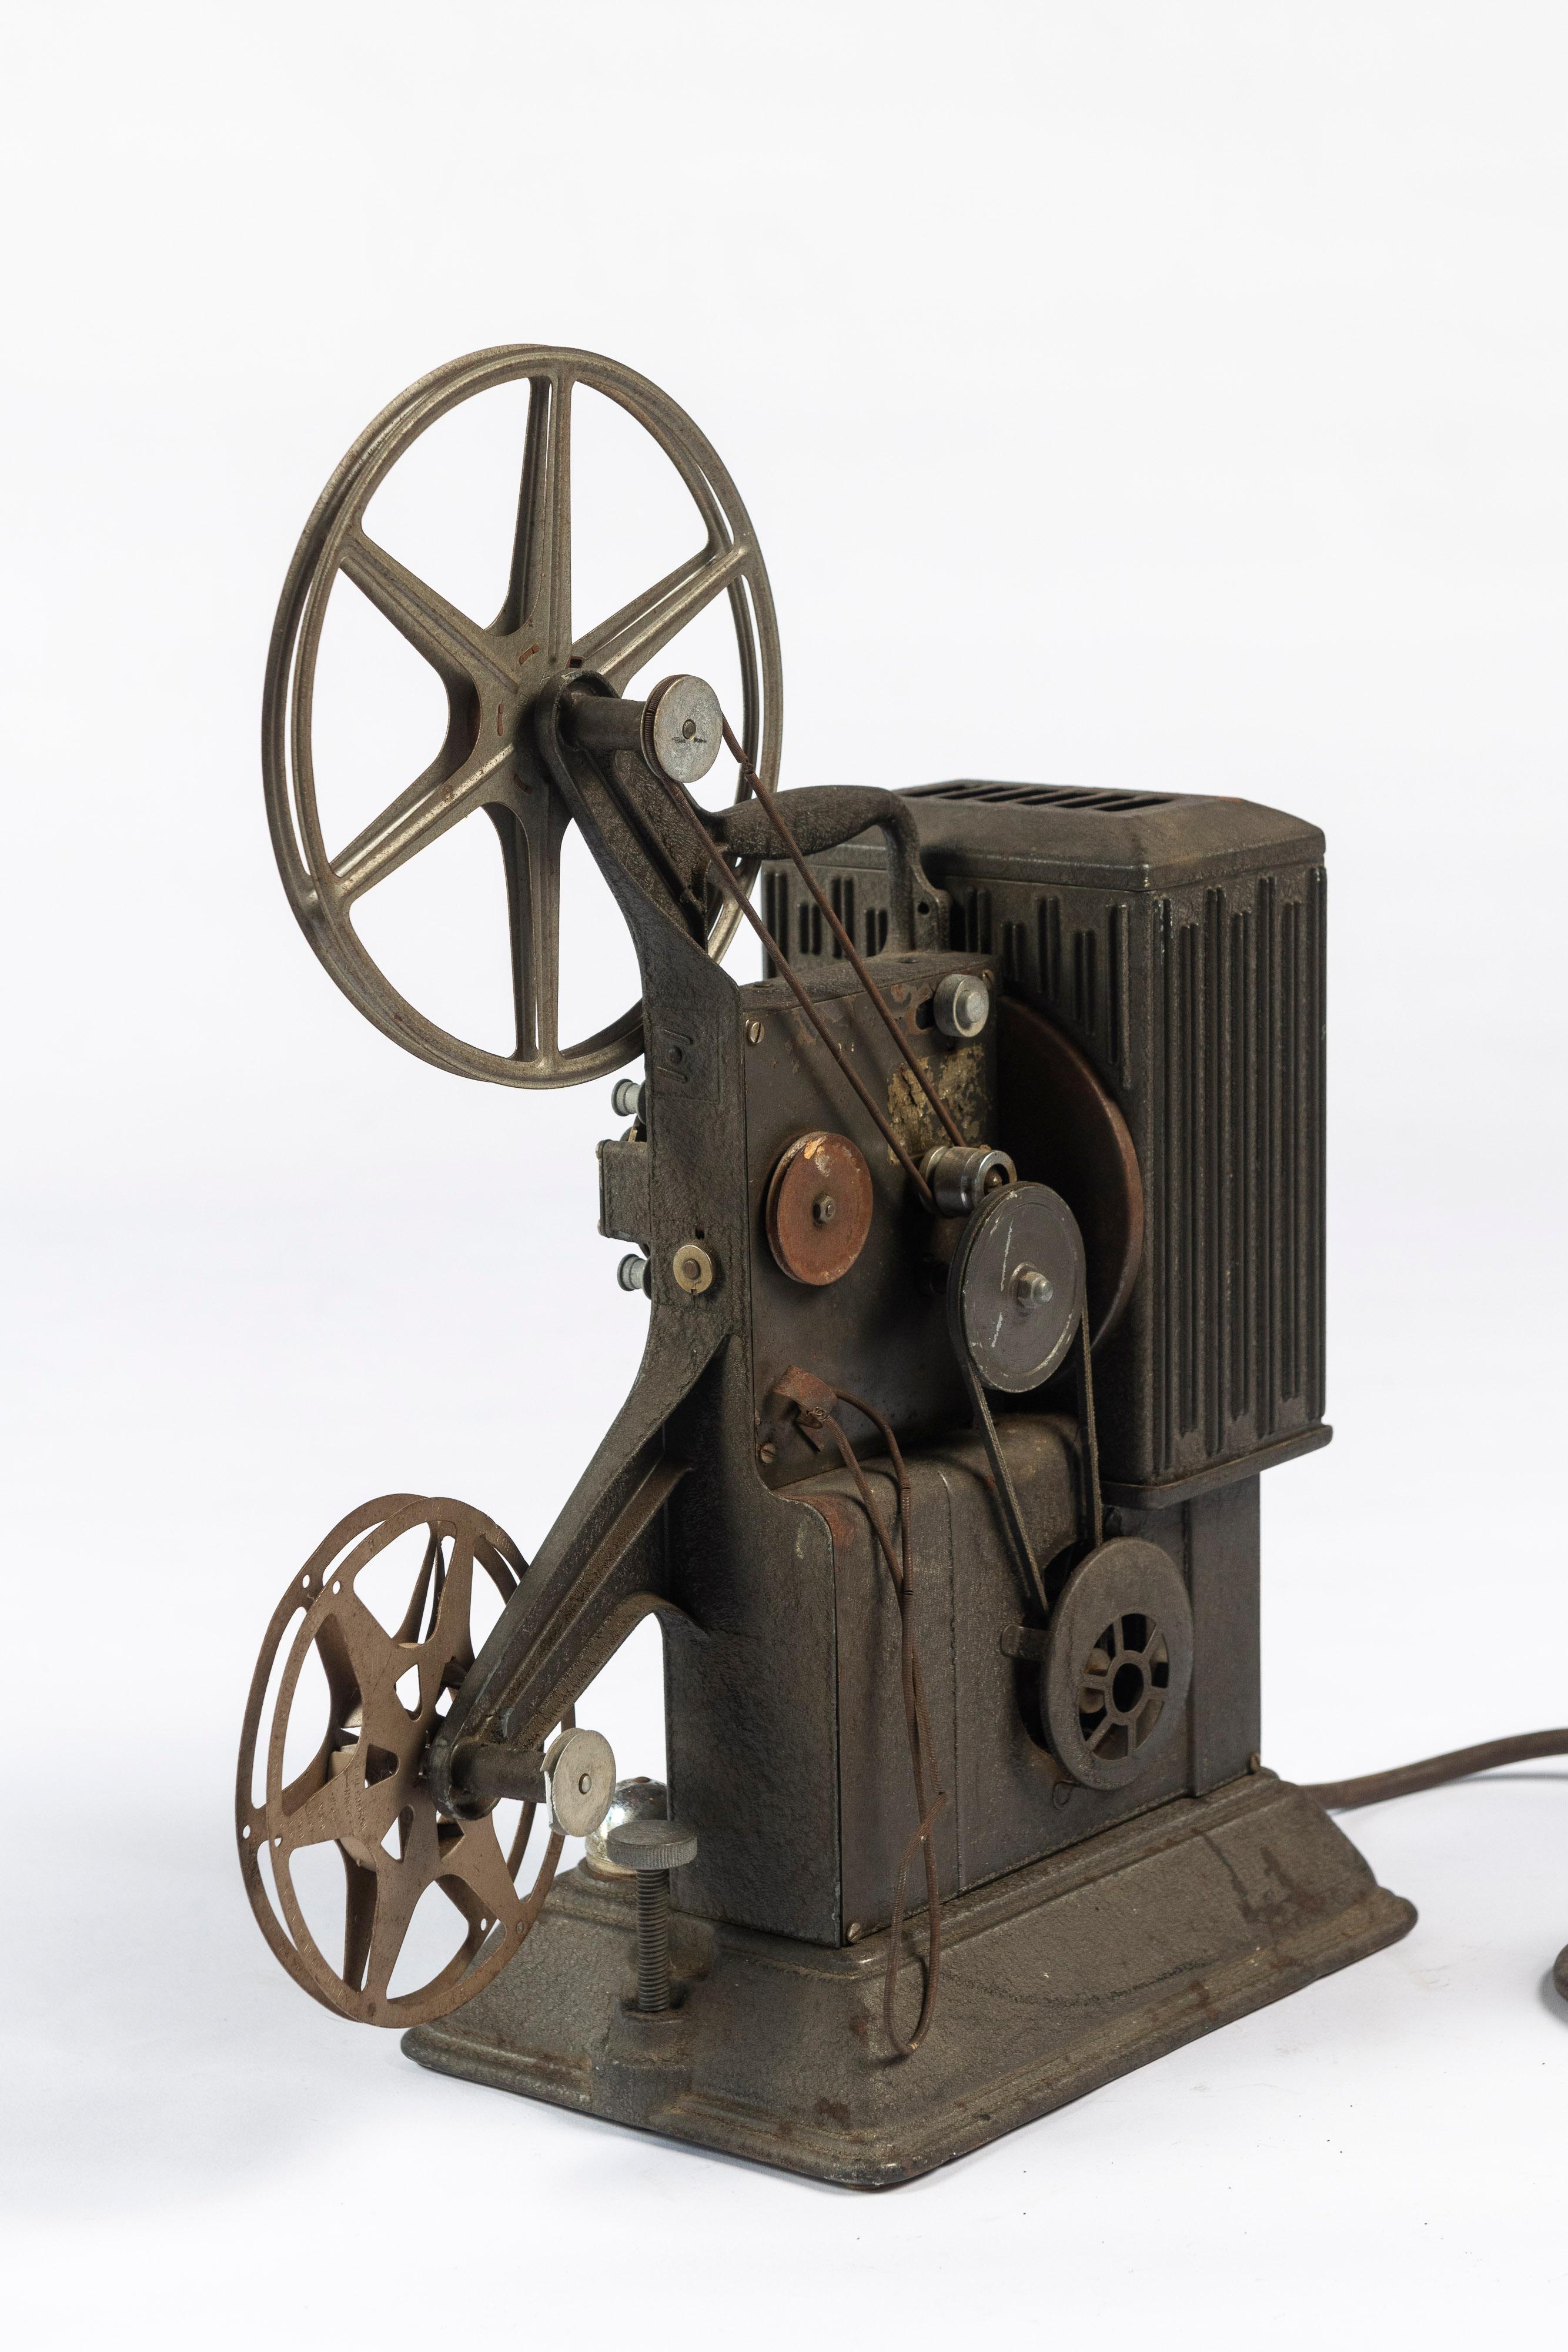 This antique Keystone 8 M.M. Film Projector, Model R-8, S/N 444000, was manufactured in Boston, MA, USA. Keystone was an iconic American brand, well known for creating equipment for the making and showing of home movies. This projector does not have